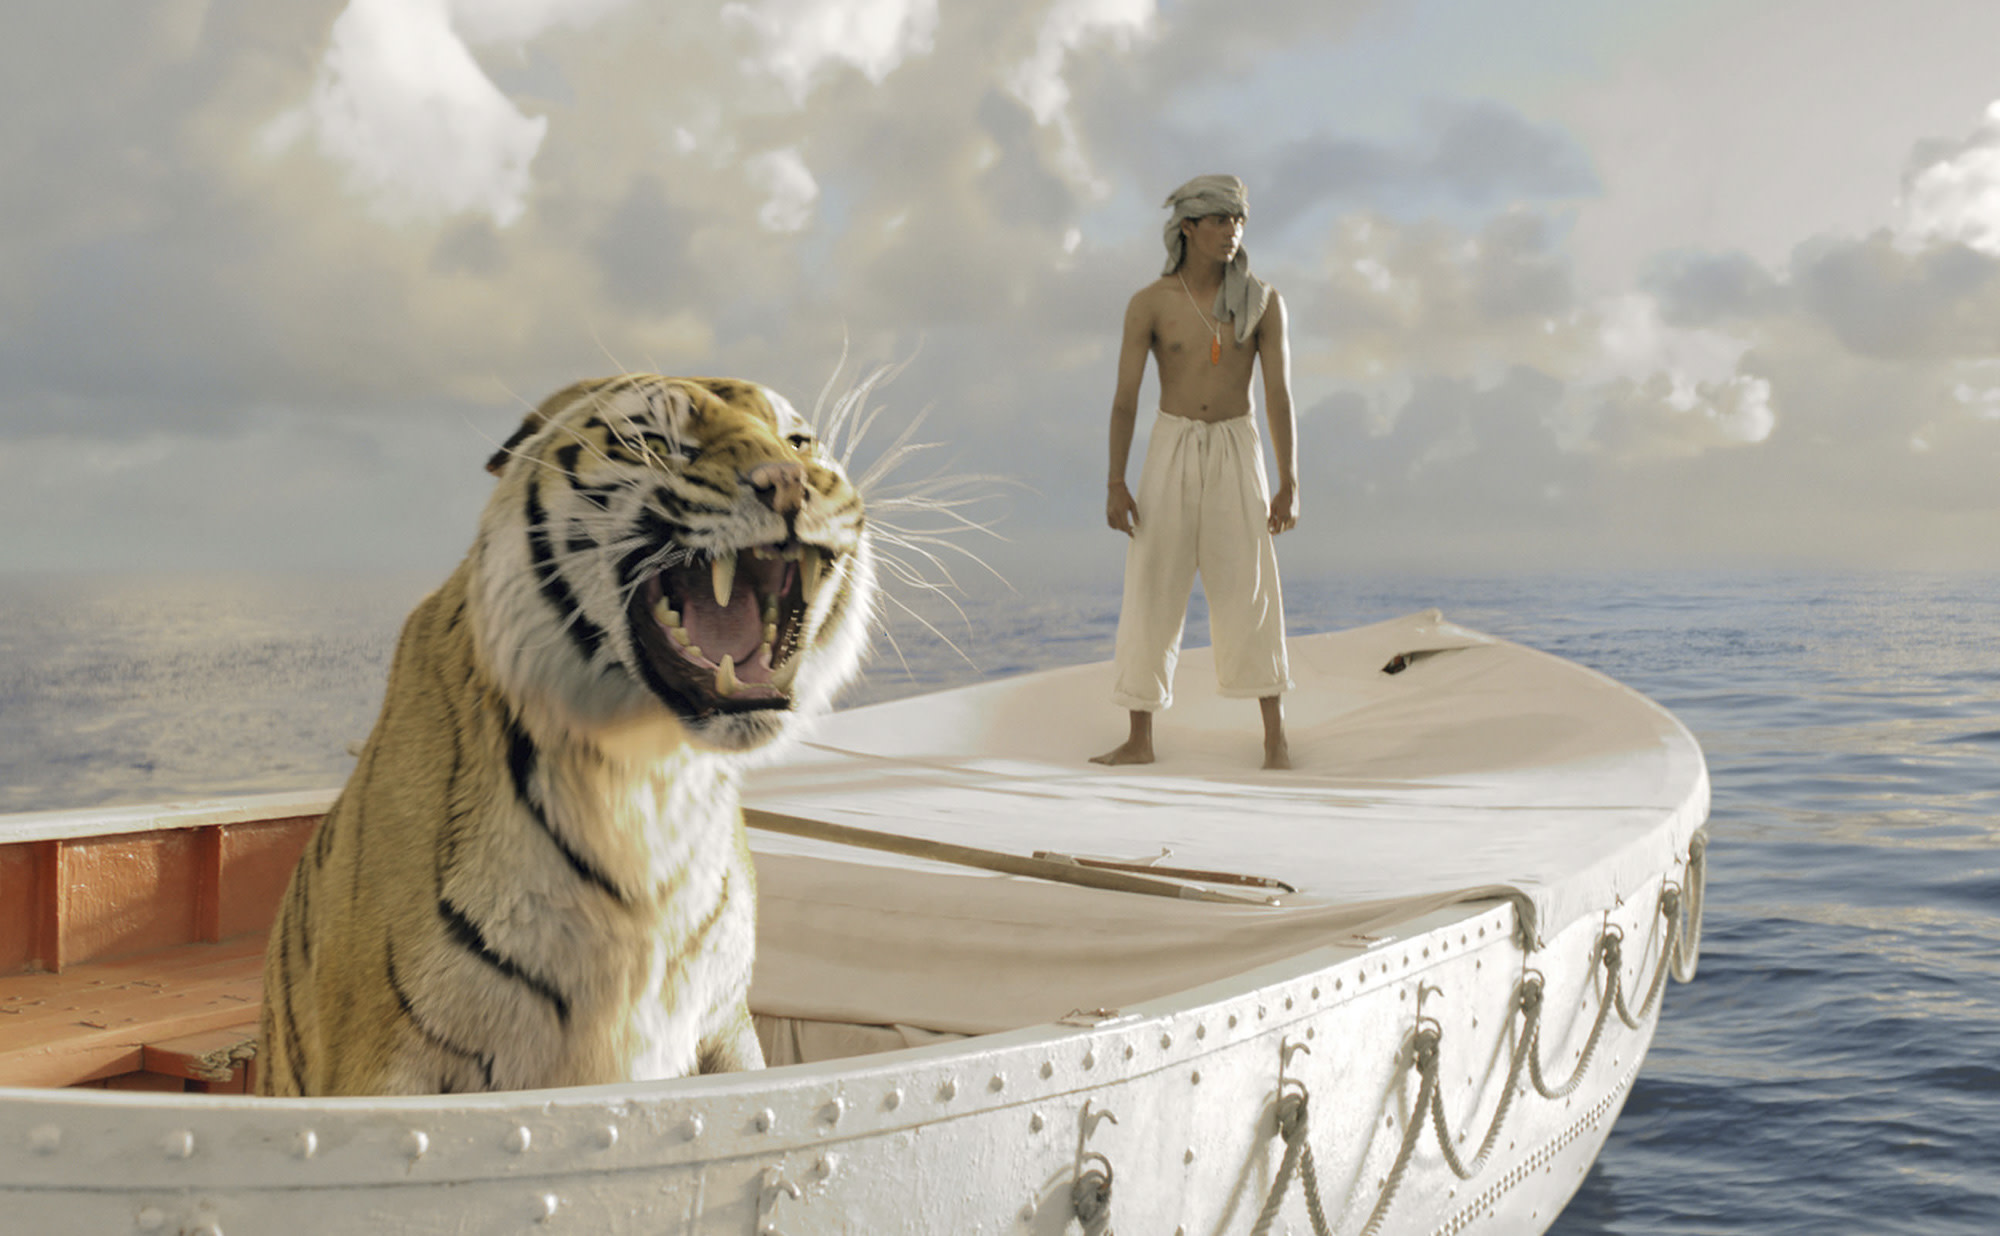 Life of Pi in 3D